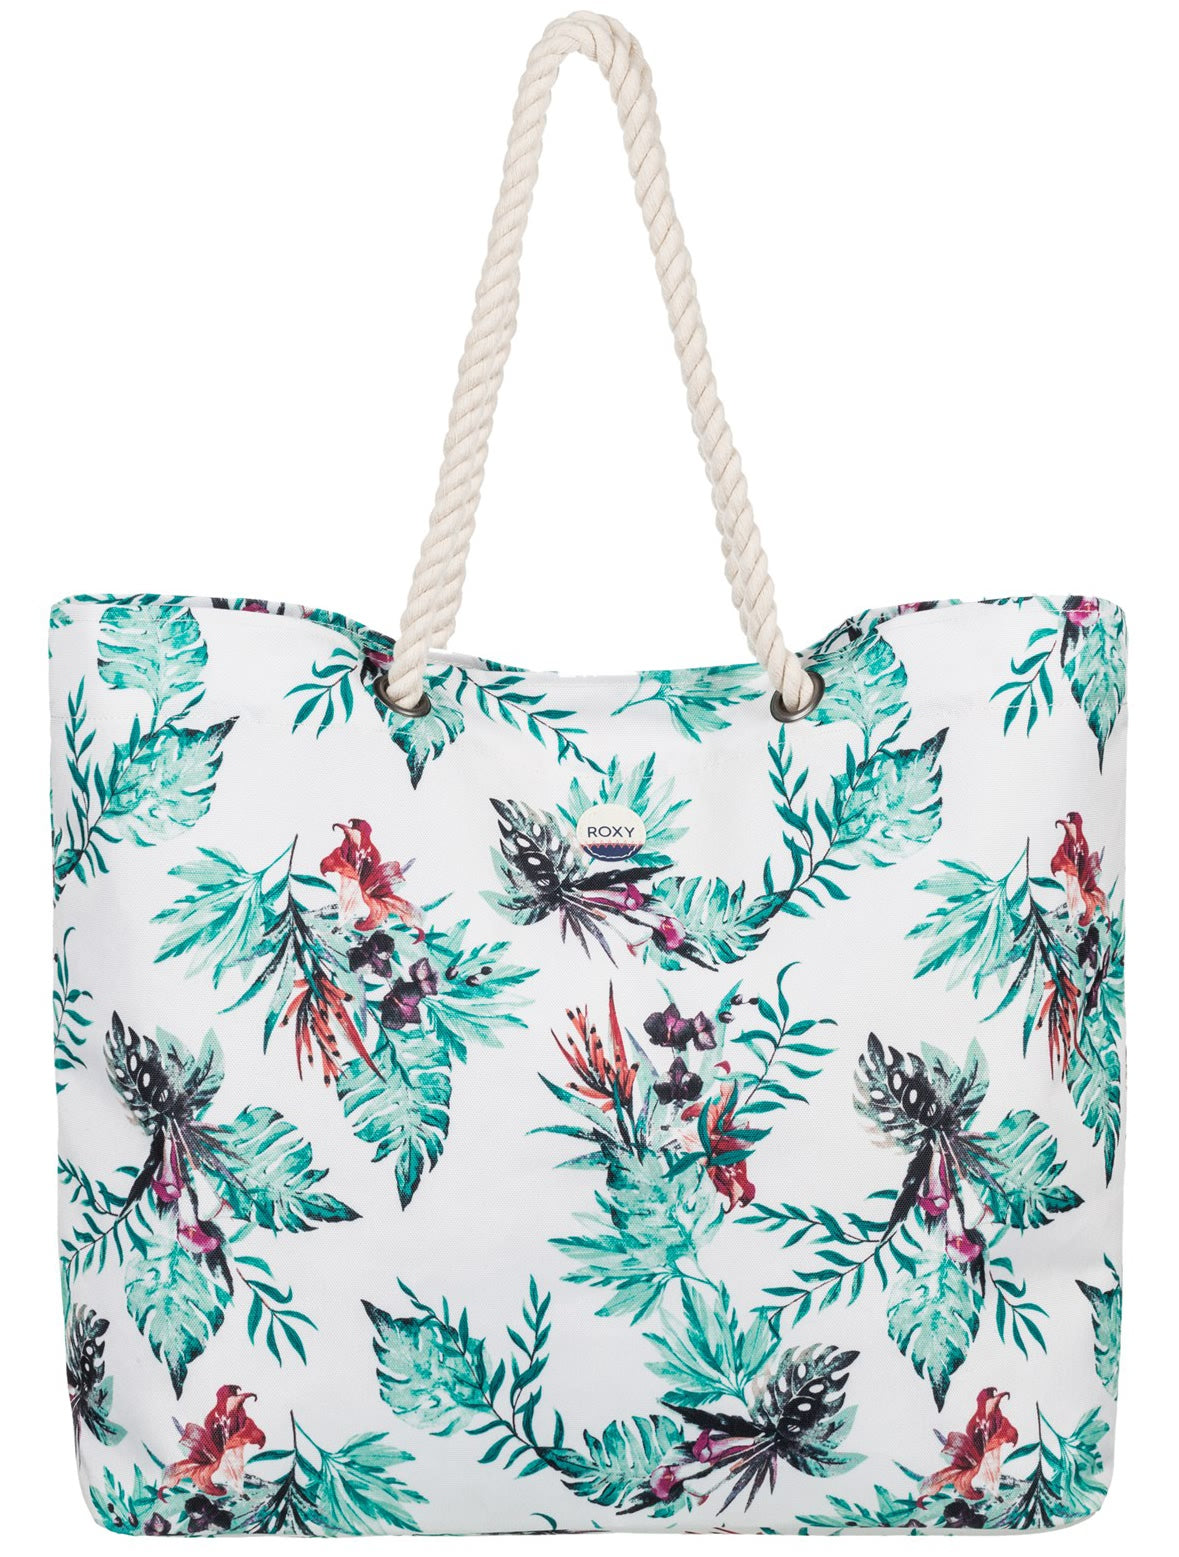 Roxy Summer 2017 Womens Beach Bags & Accessories Collection